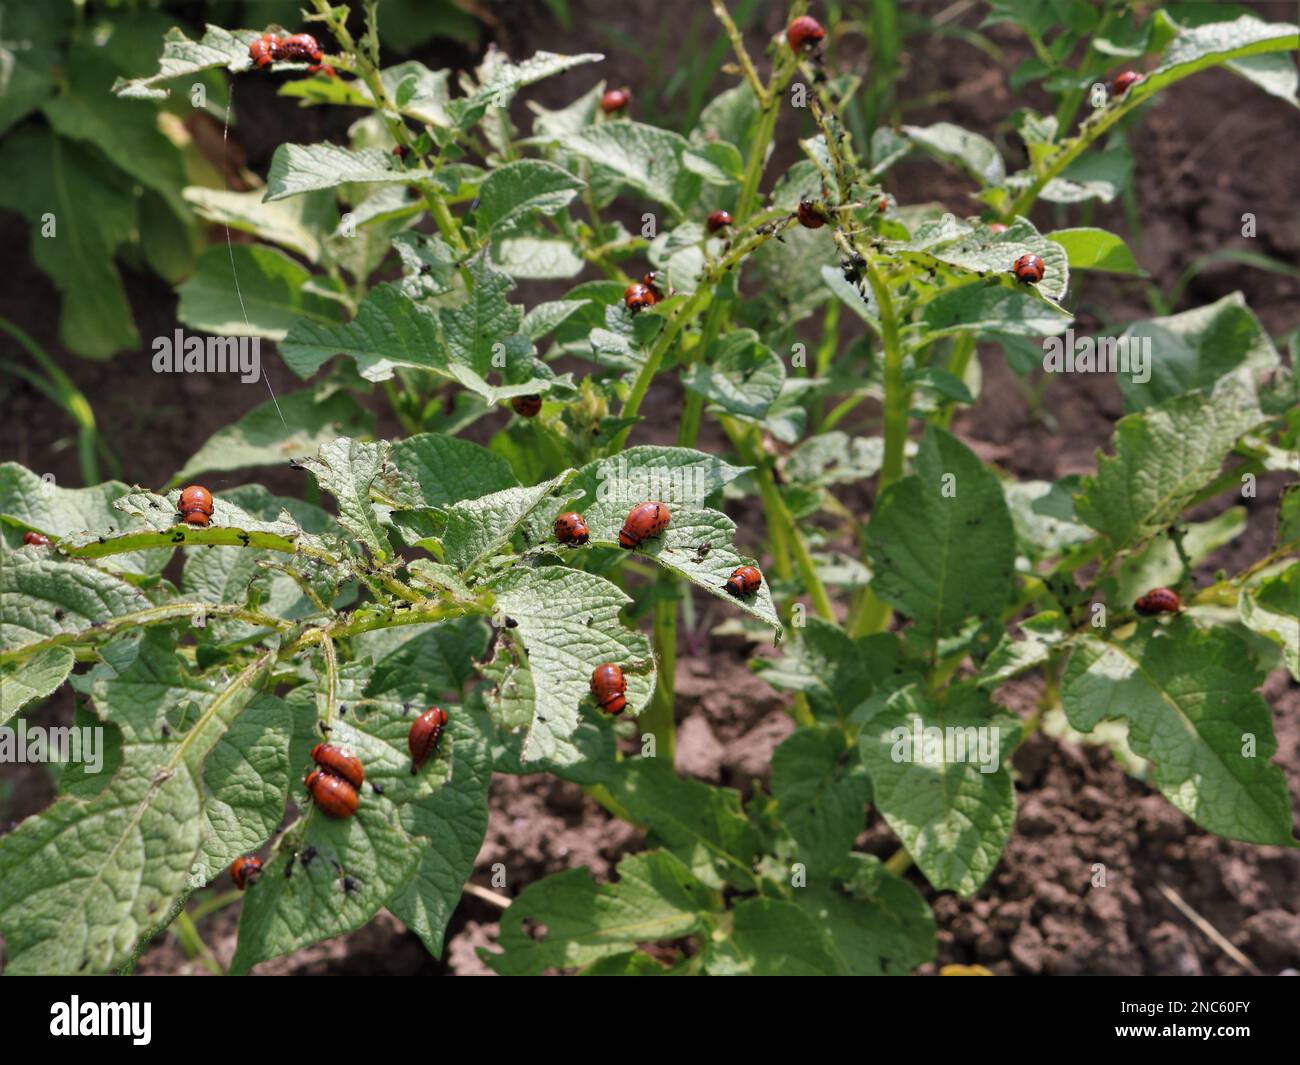 larvae of the Colorado potato beetle eating the tops of potato bushes in an agricultural field, parasitic insects feeding on the leaves of nightshade Stock Photo